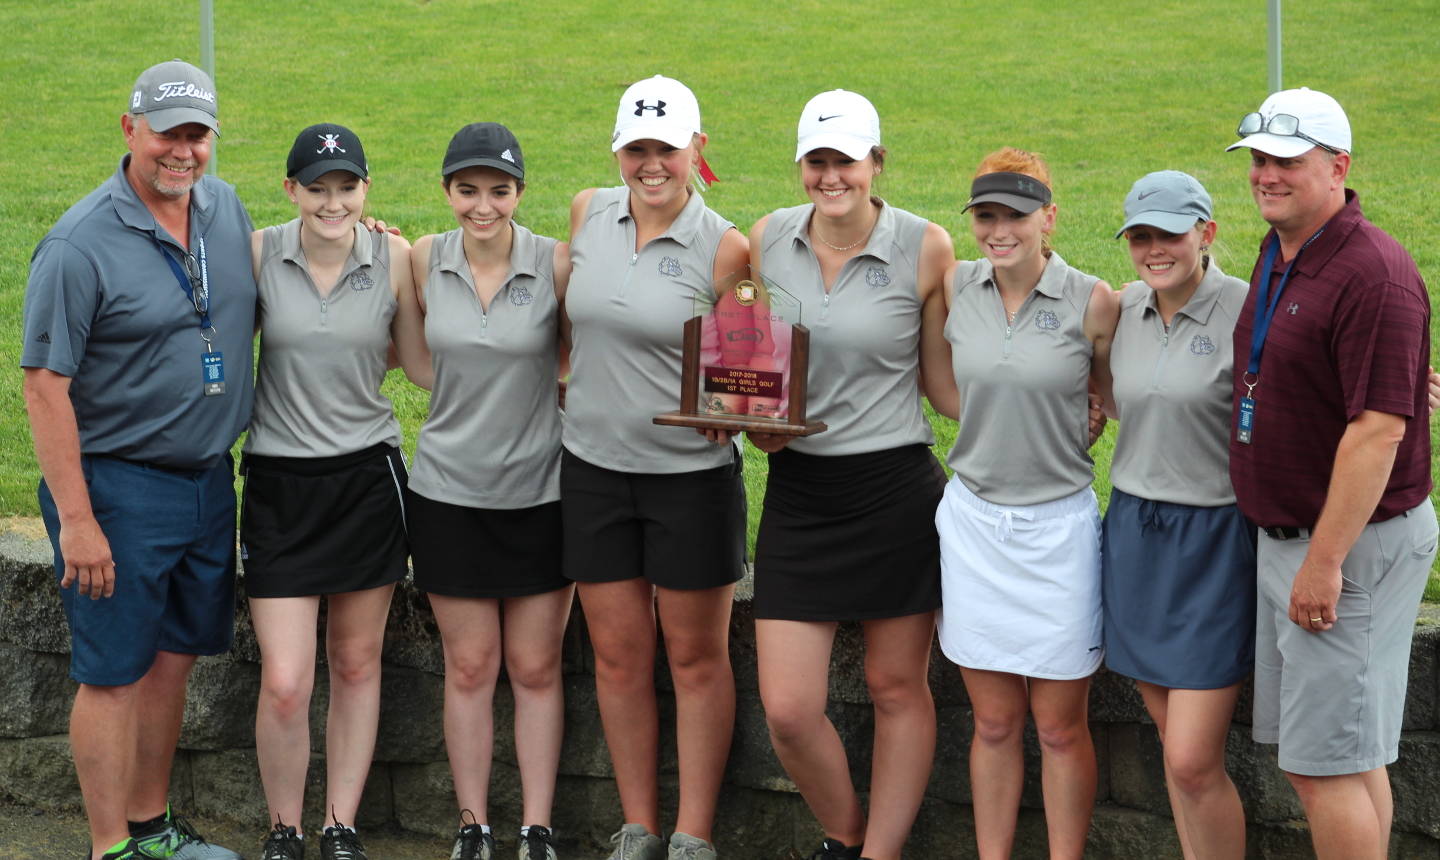 Photo by Angela Denholm The Montesano golf team (from left) head coach Doug Galloway, Lauren Denholm, Morgan Malizia, Macey Wecker, McKenna Miller, Glory Grubb, Mylaina Parker and coach Jon Parker pose with their state championship trophy after winning the 1A/2B/1B State Tournament on Wednesday.